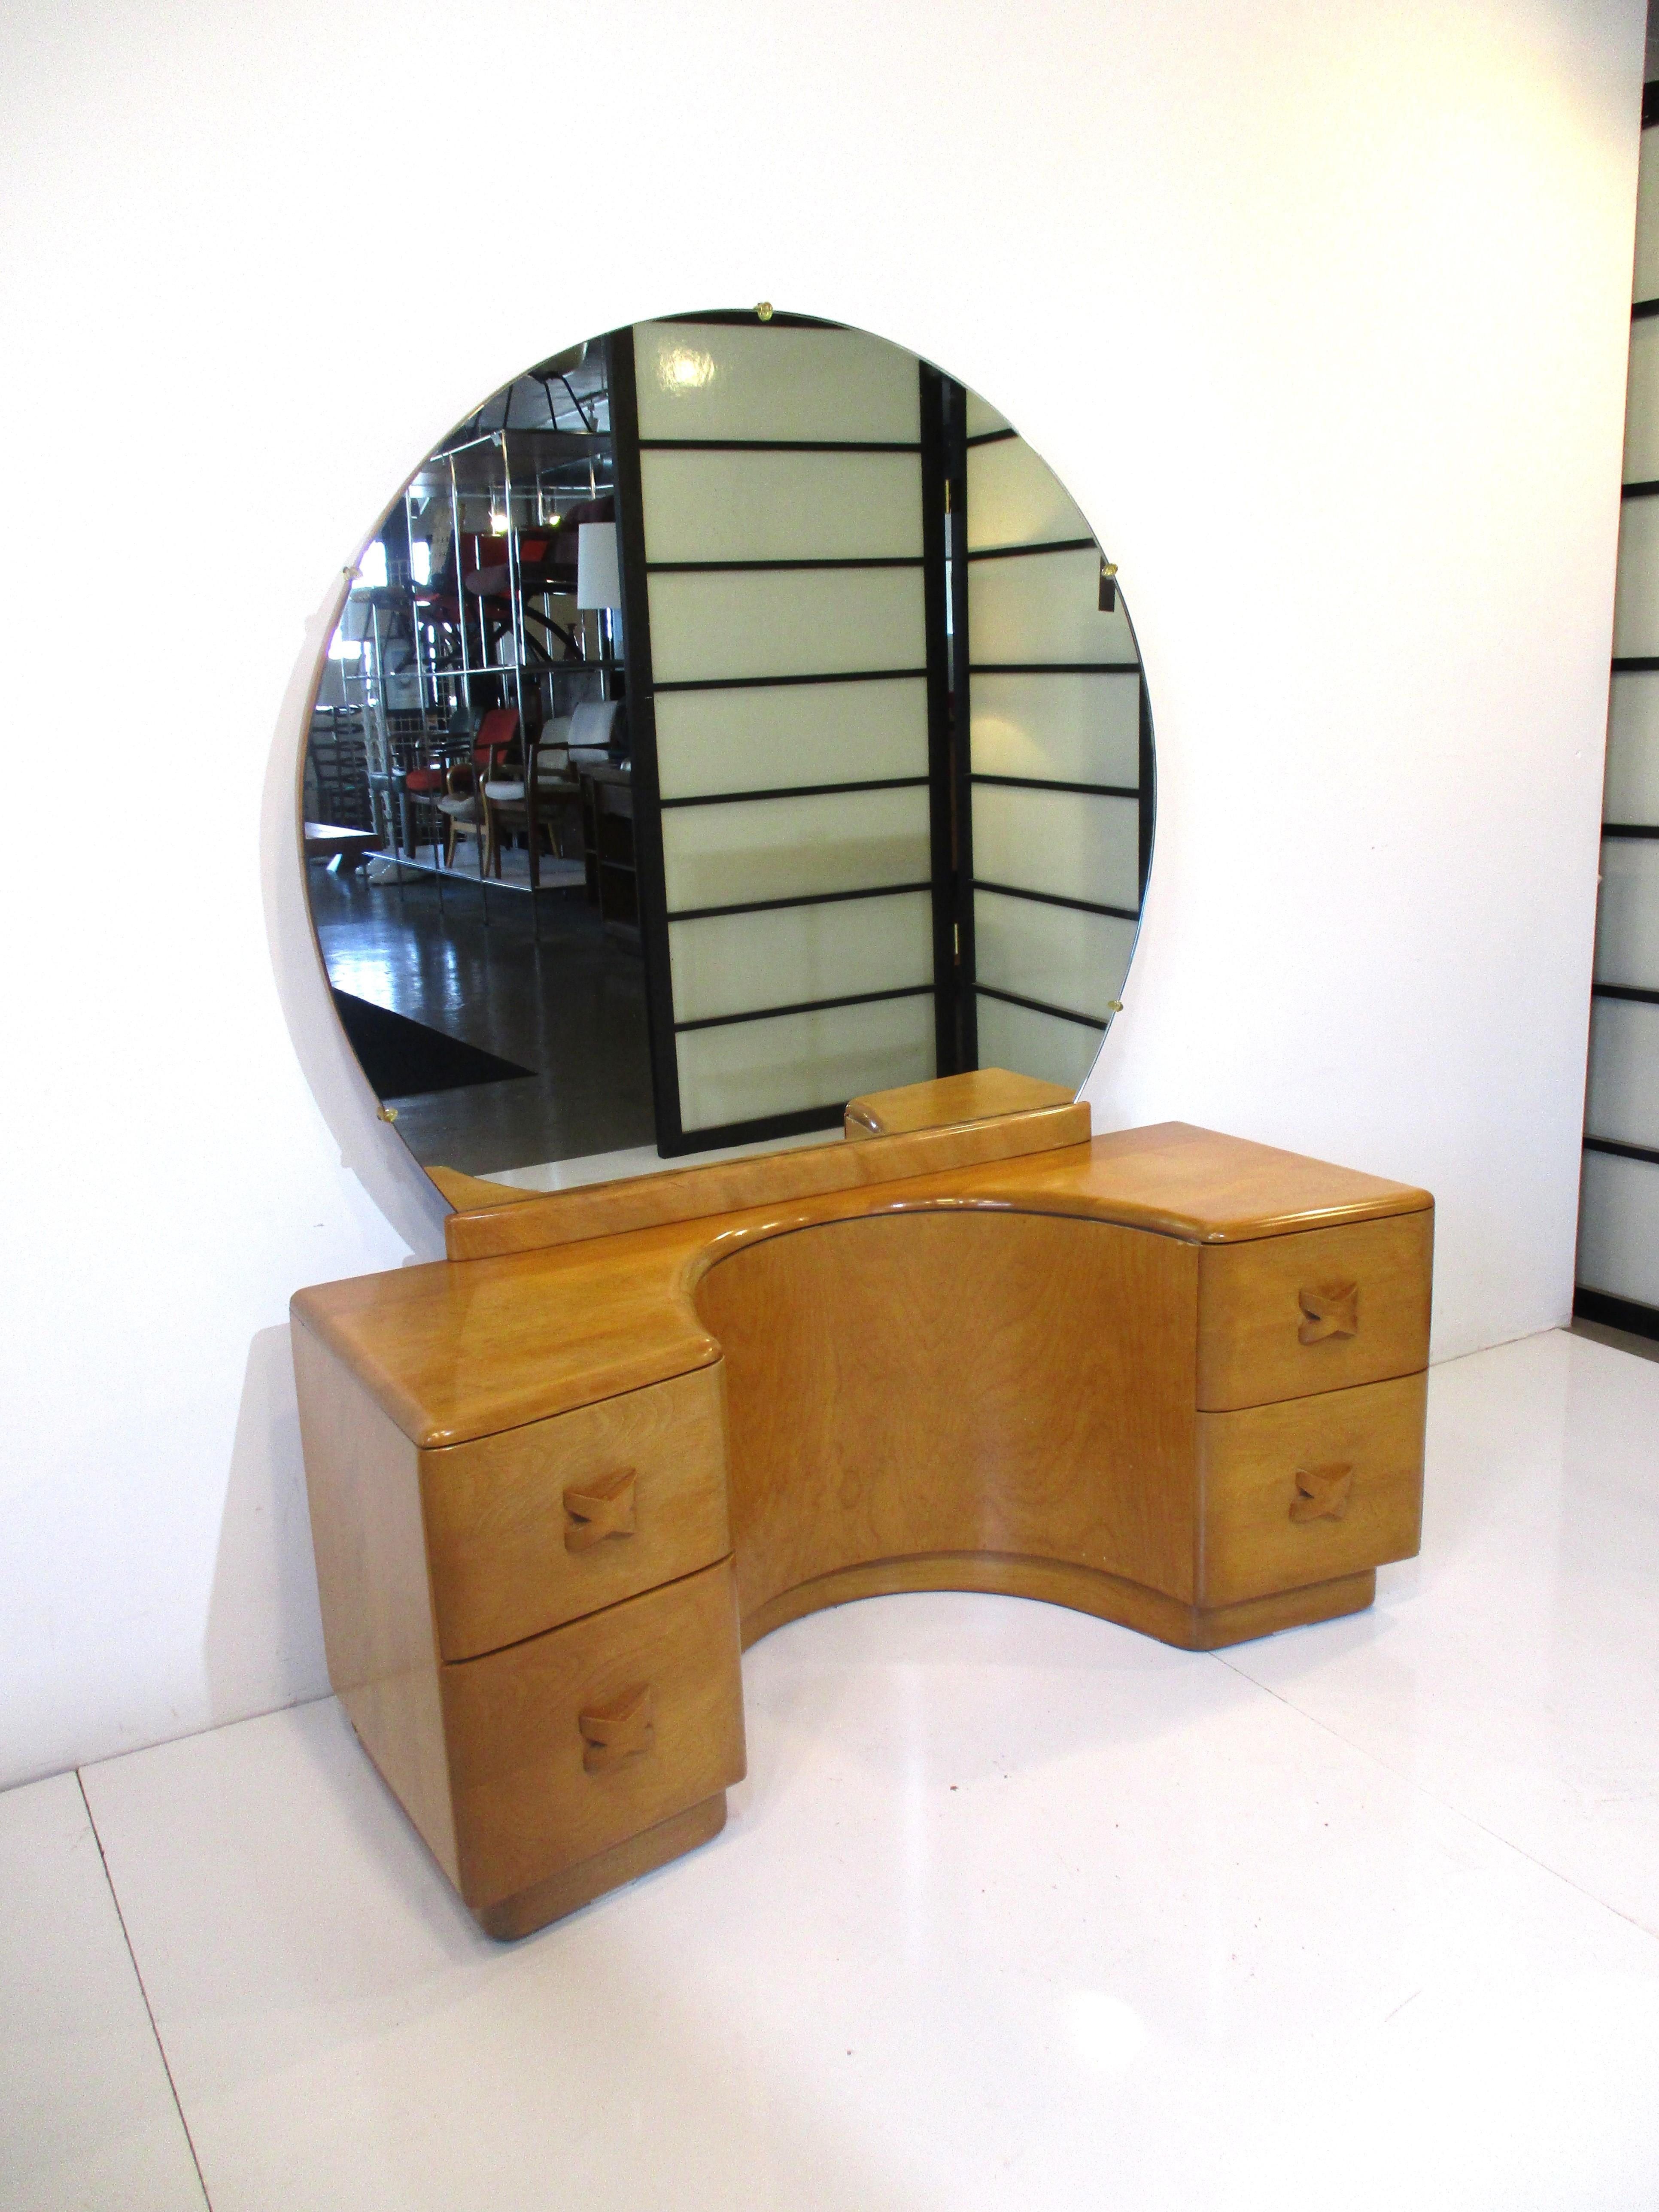 A very well crafted solid maple wood vanity with round mirror sculptural top surface with cut out. The lower area has four drawers with X shaped wooden pulls and it still retains the original stool with original upholstery. Manufactured by the